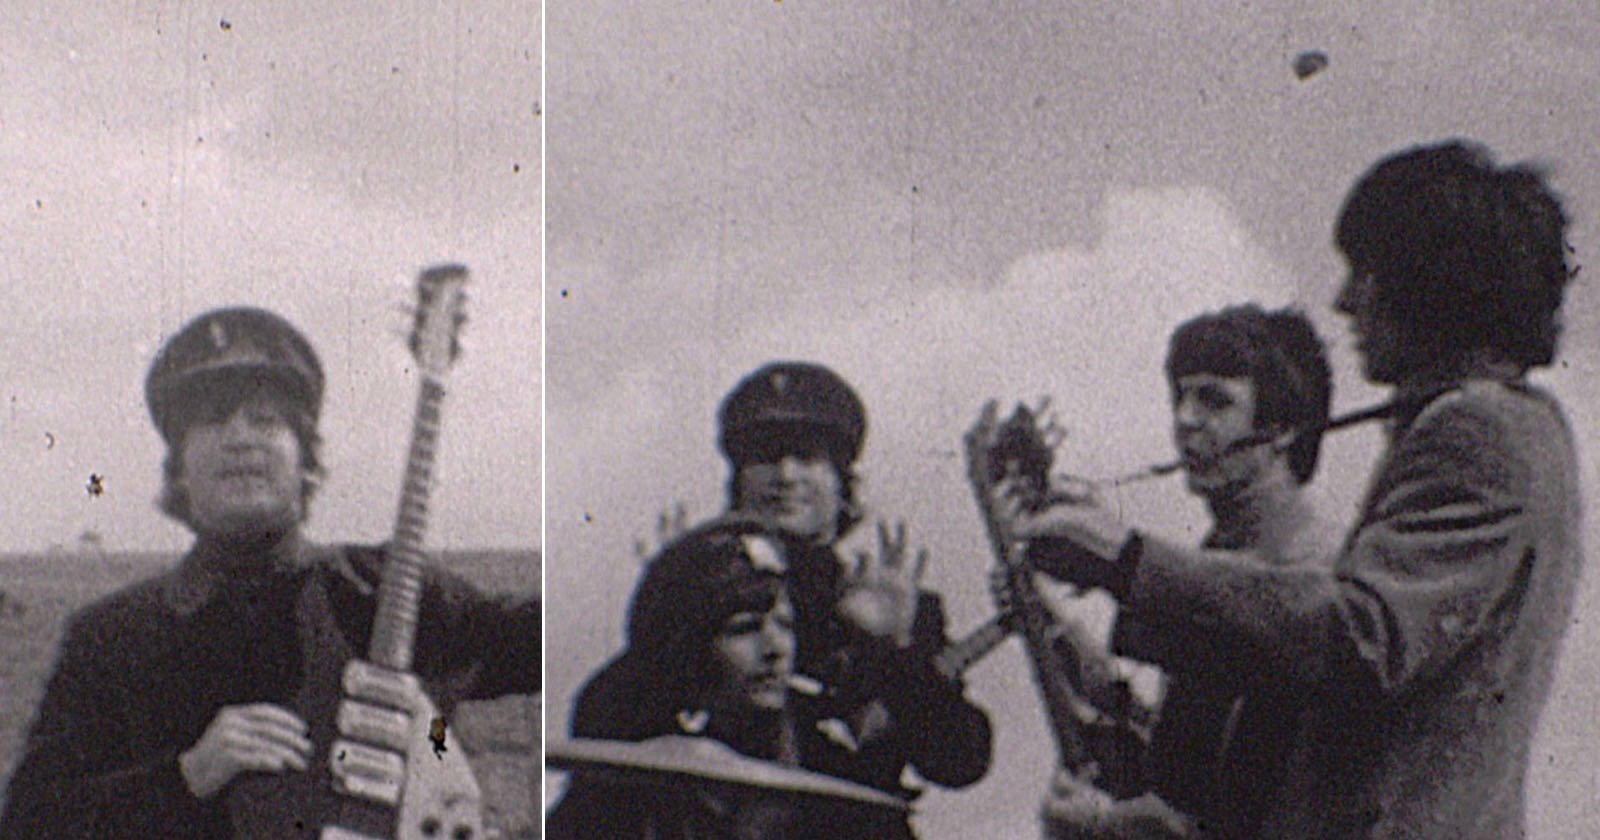 Unseen 8mm Footage of The Beatles Expected to Sell for $10,000